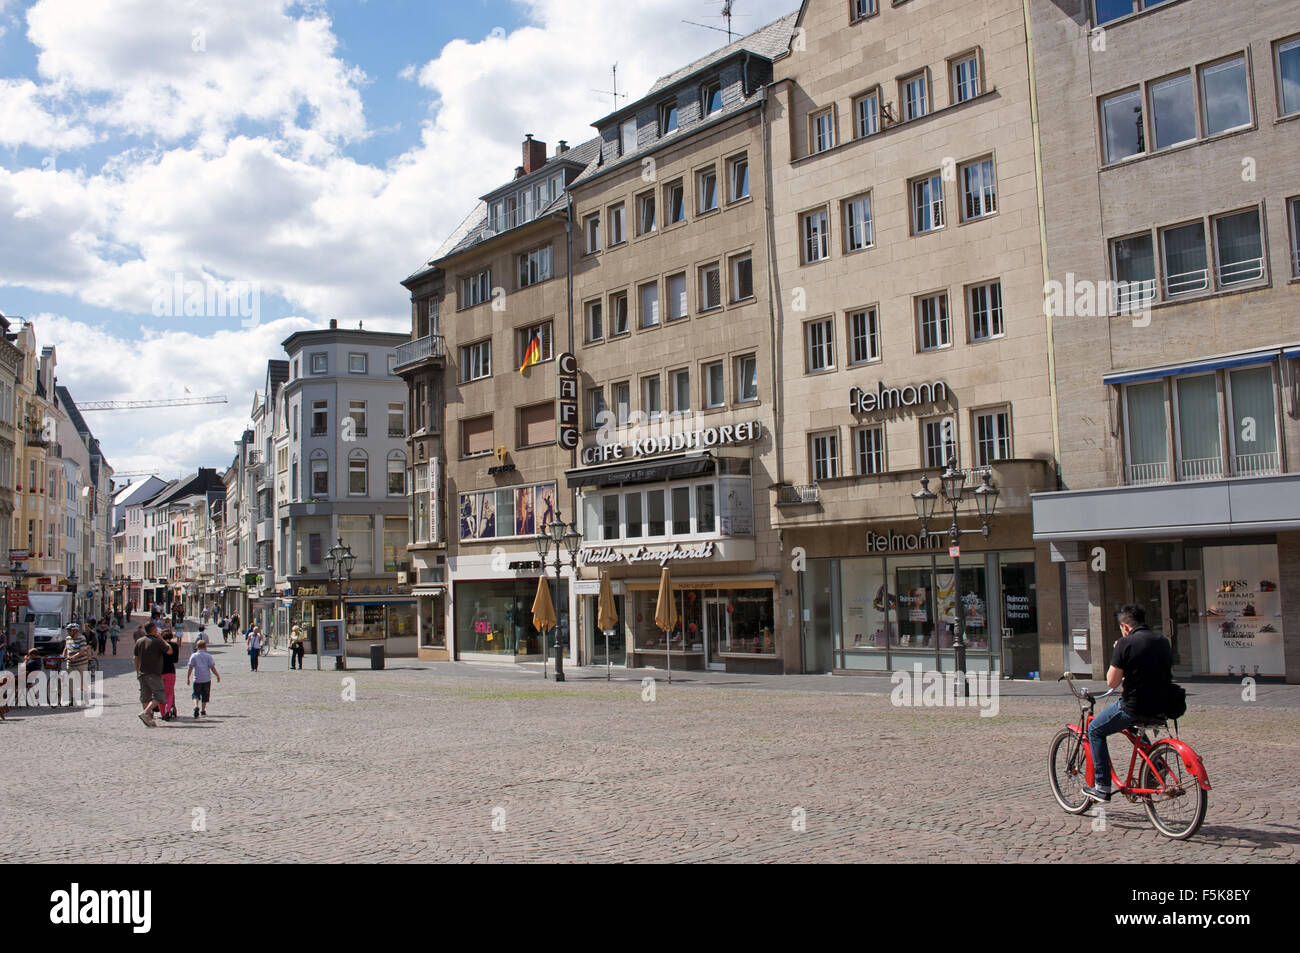 Bonn City High Resolution Stock Photography and Images - Alamy